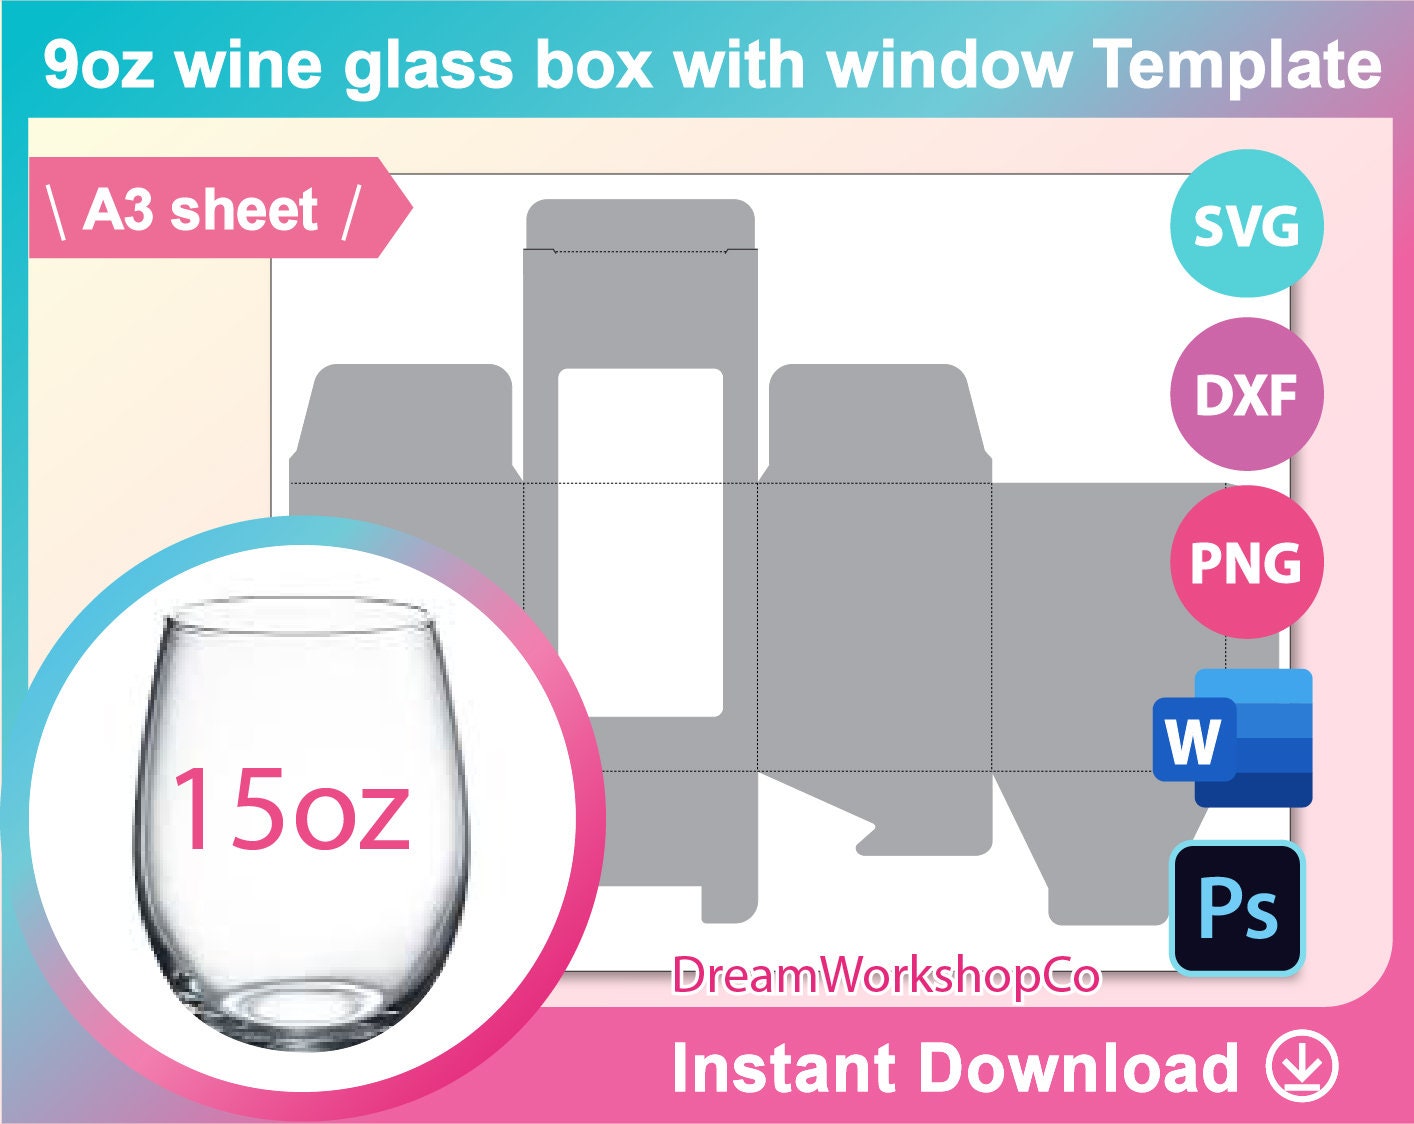 15-oz-wine-glass-box-template-sublimation-ms-word-psd-png-etsy